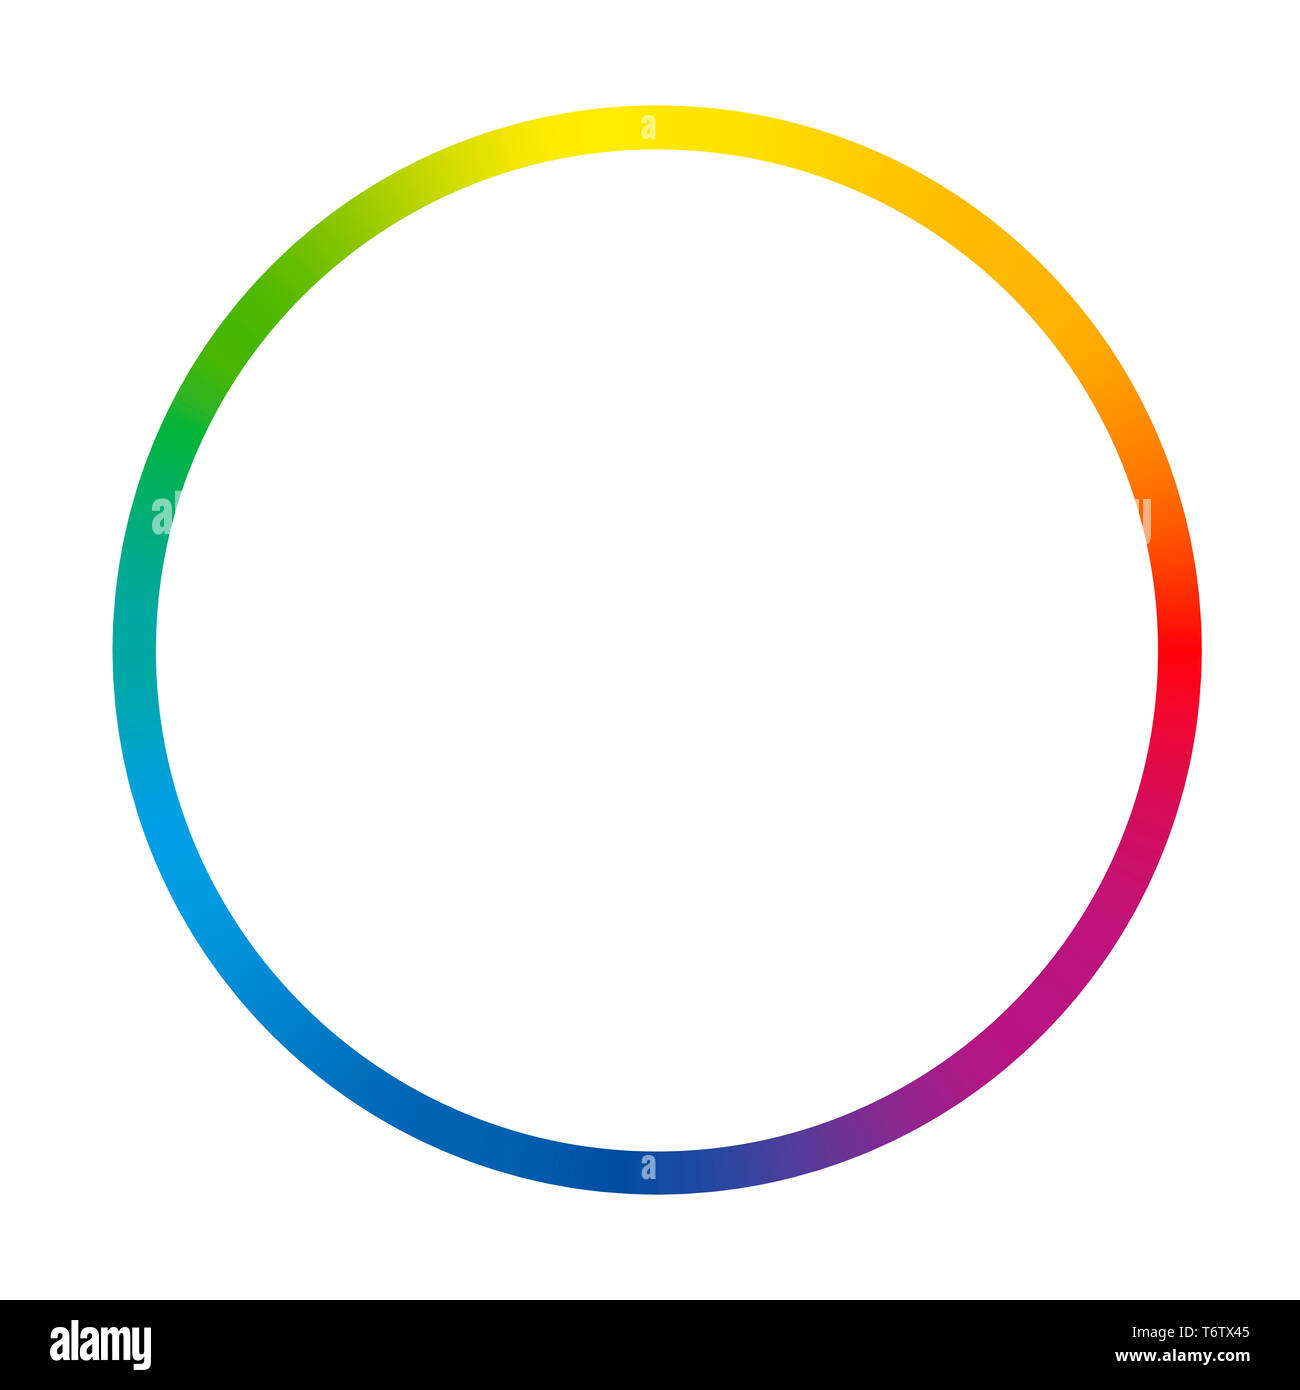 Gradient color ring. Rainbow colored thin circle - illustration on white background. Stock Photo